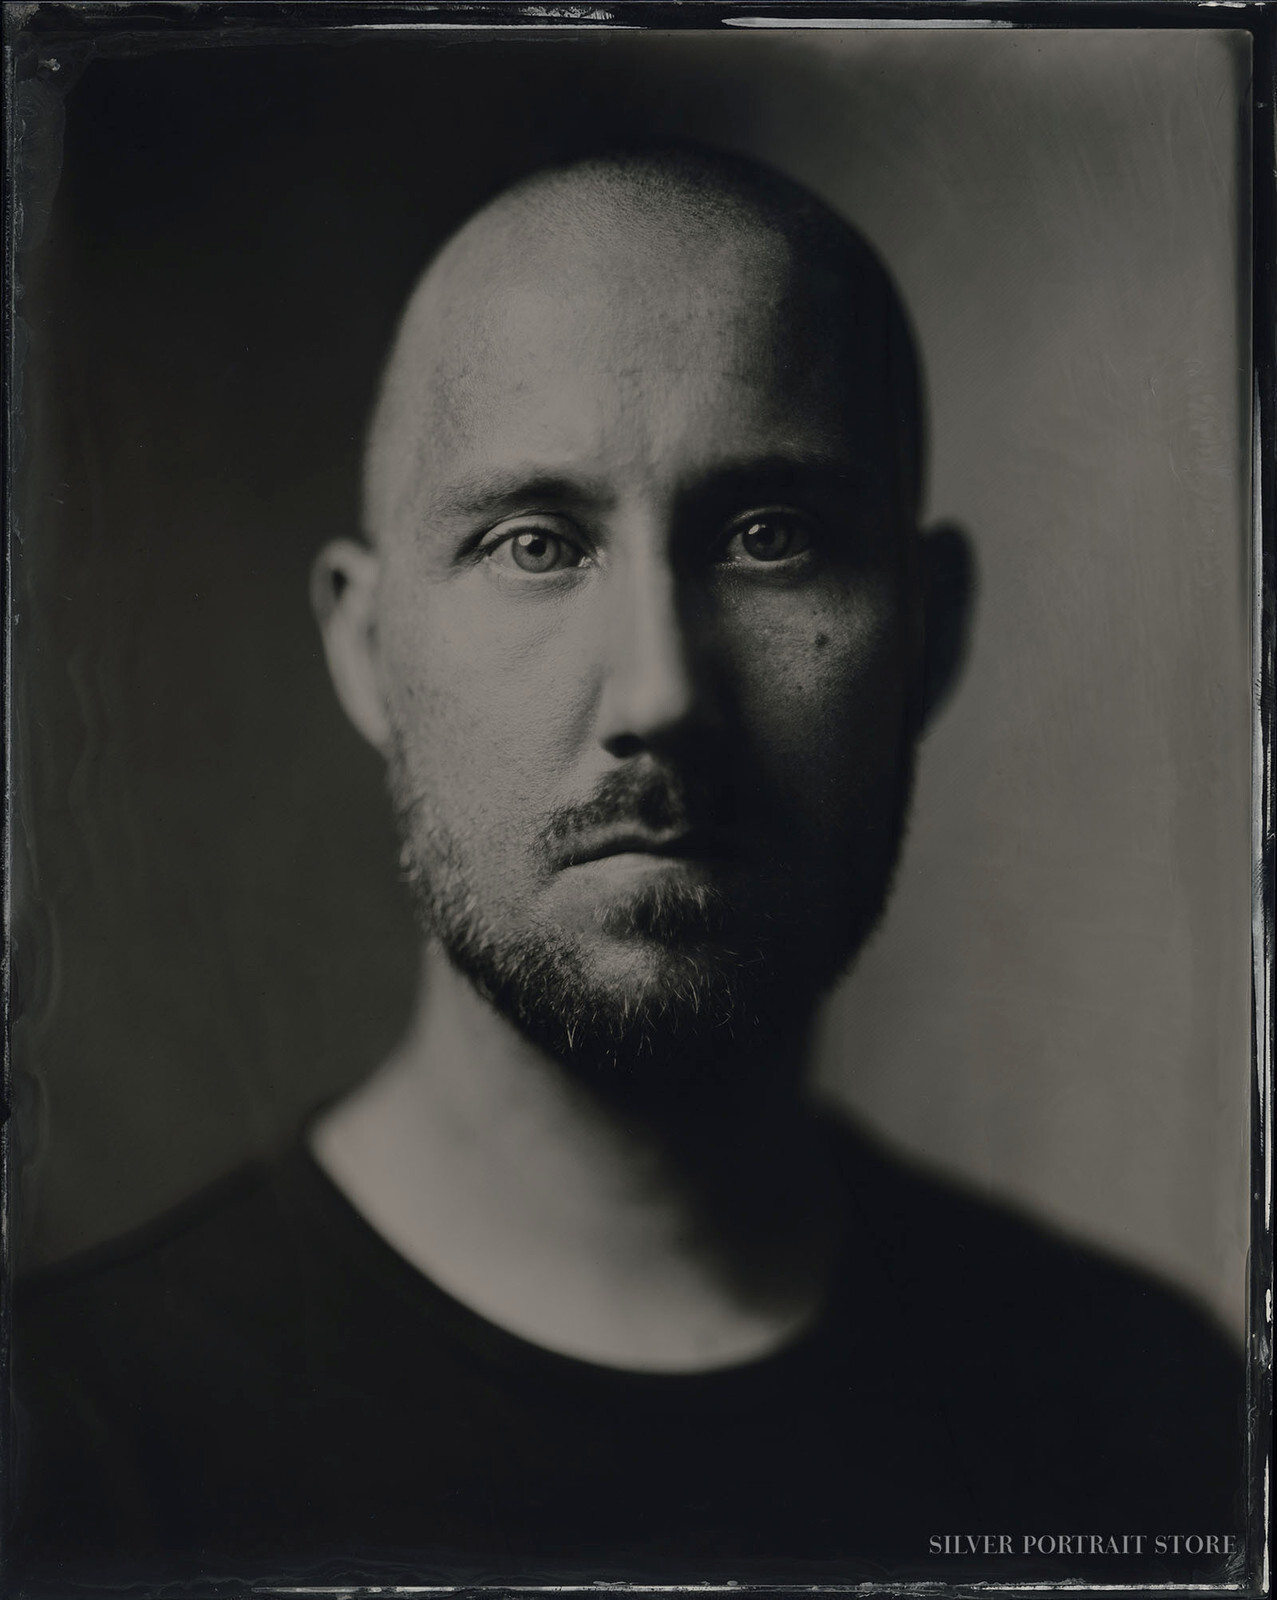 Andreas-Silver Portrait Store-scan from Wet plate collodion-Tintype 20 x 25 cm.